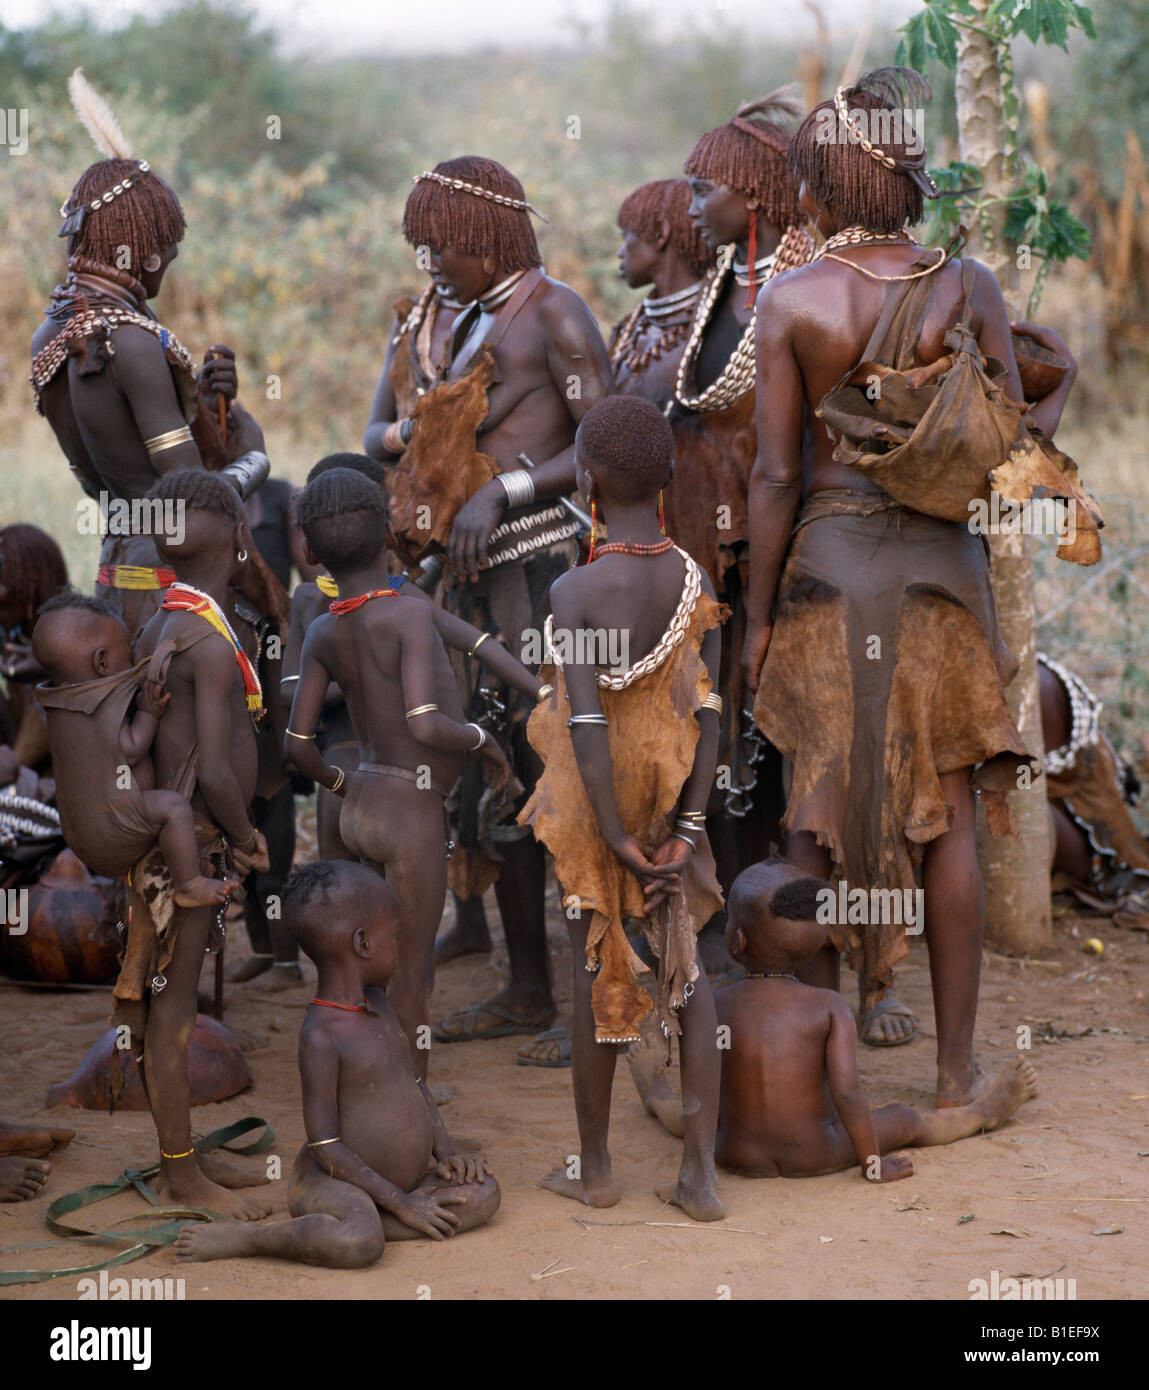 A group of Hamar women and children in traditional dress. The Hamar are semi-nomadic pastoralists. Stock Photo